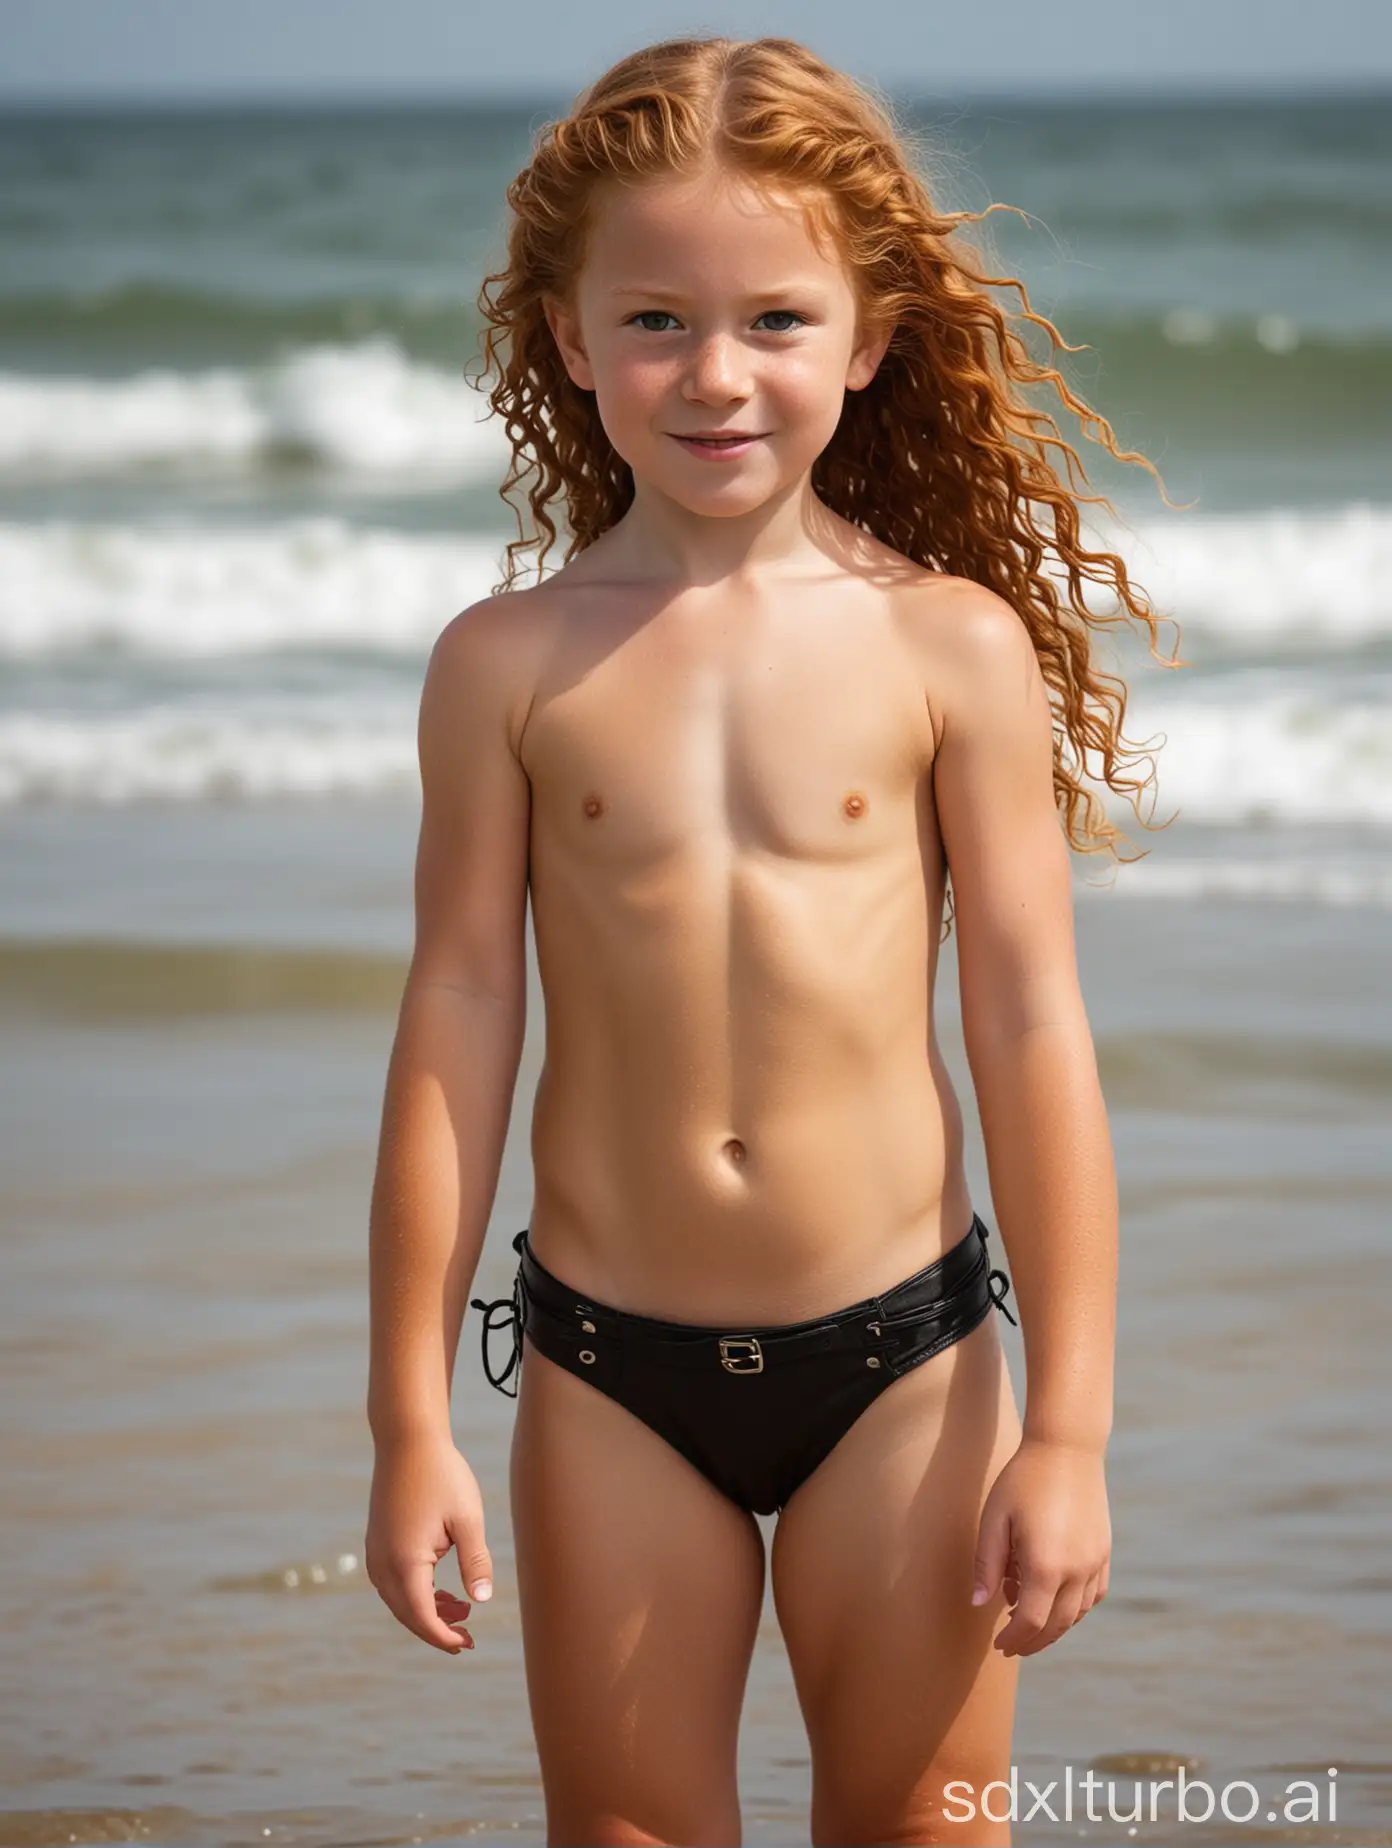 6 years old viking girl, long curly ginger hair, very muscular abs, flat chested, showing belly, tiny leather bathingsuit, beach